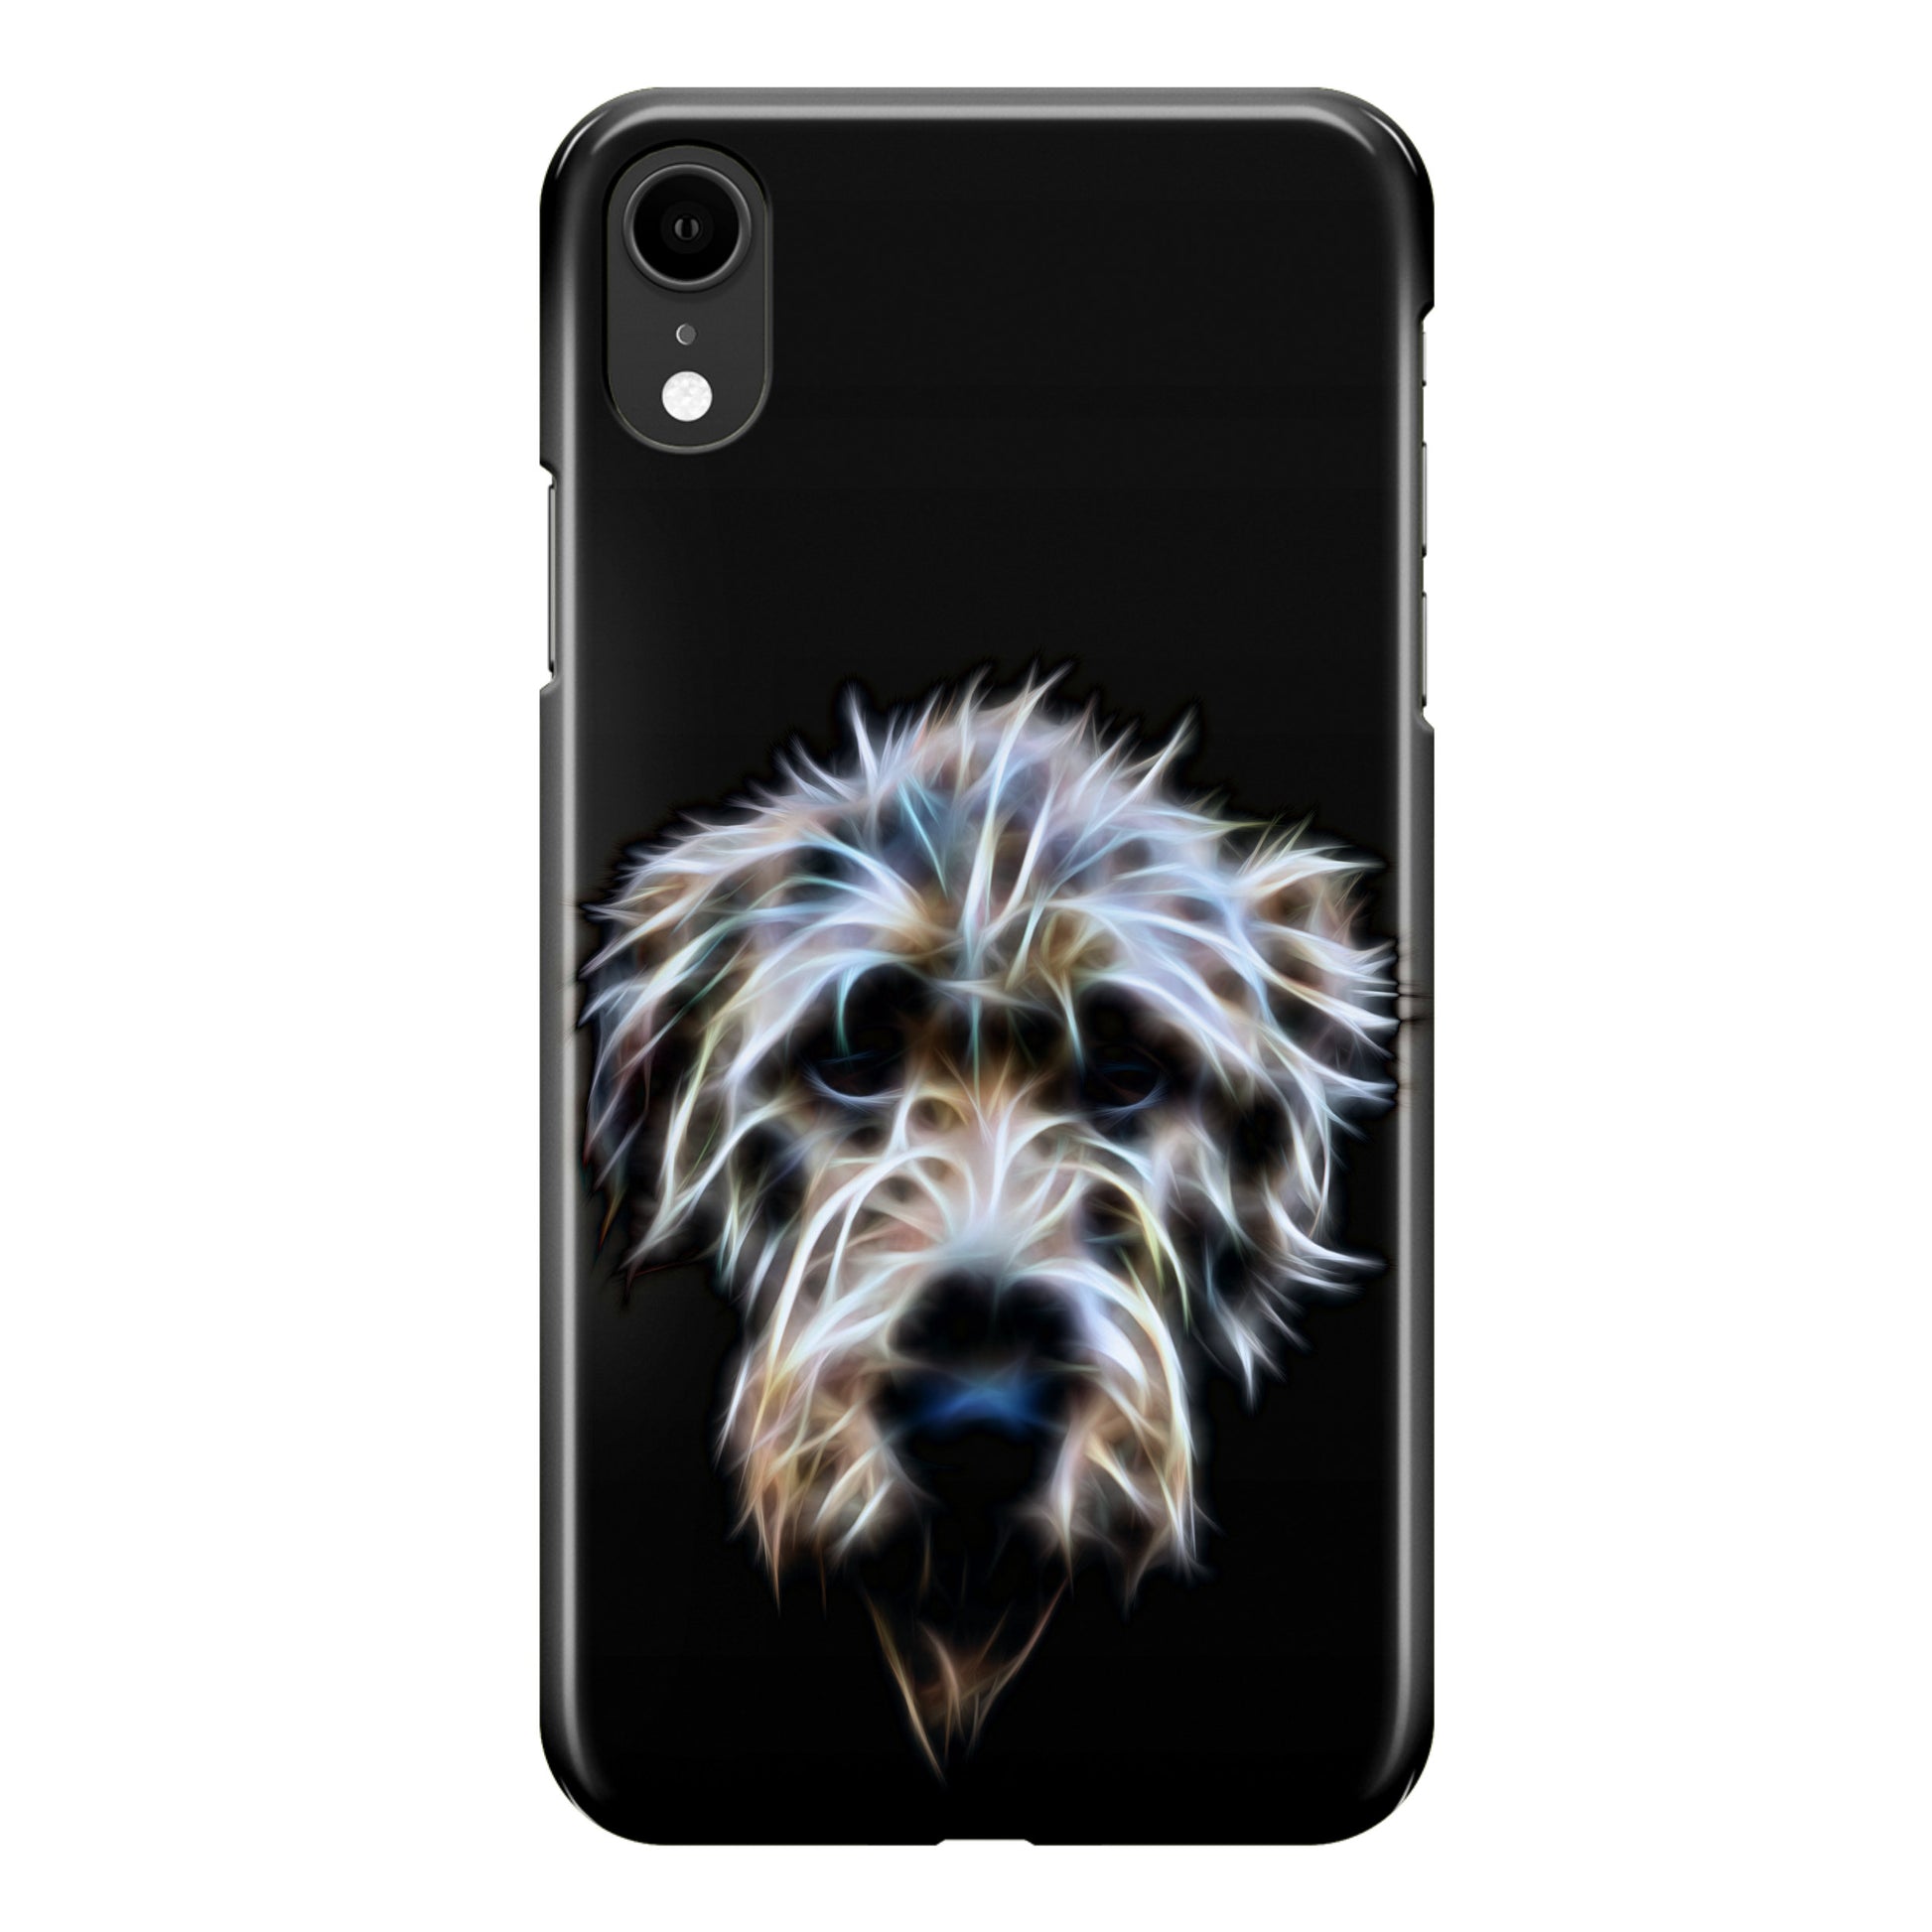 Irish Wolfhound Phone Case with Stunning Fractal Art Design. For Samsung or iPhone.